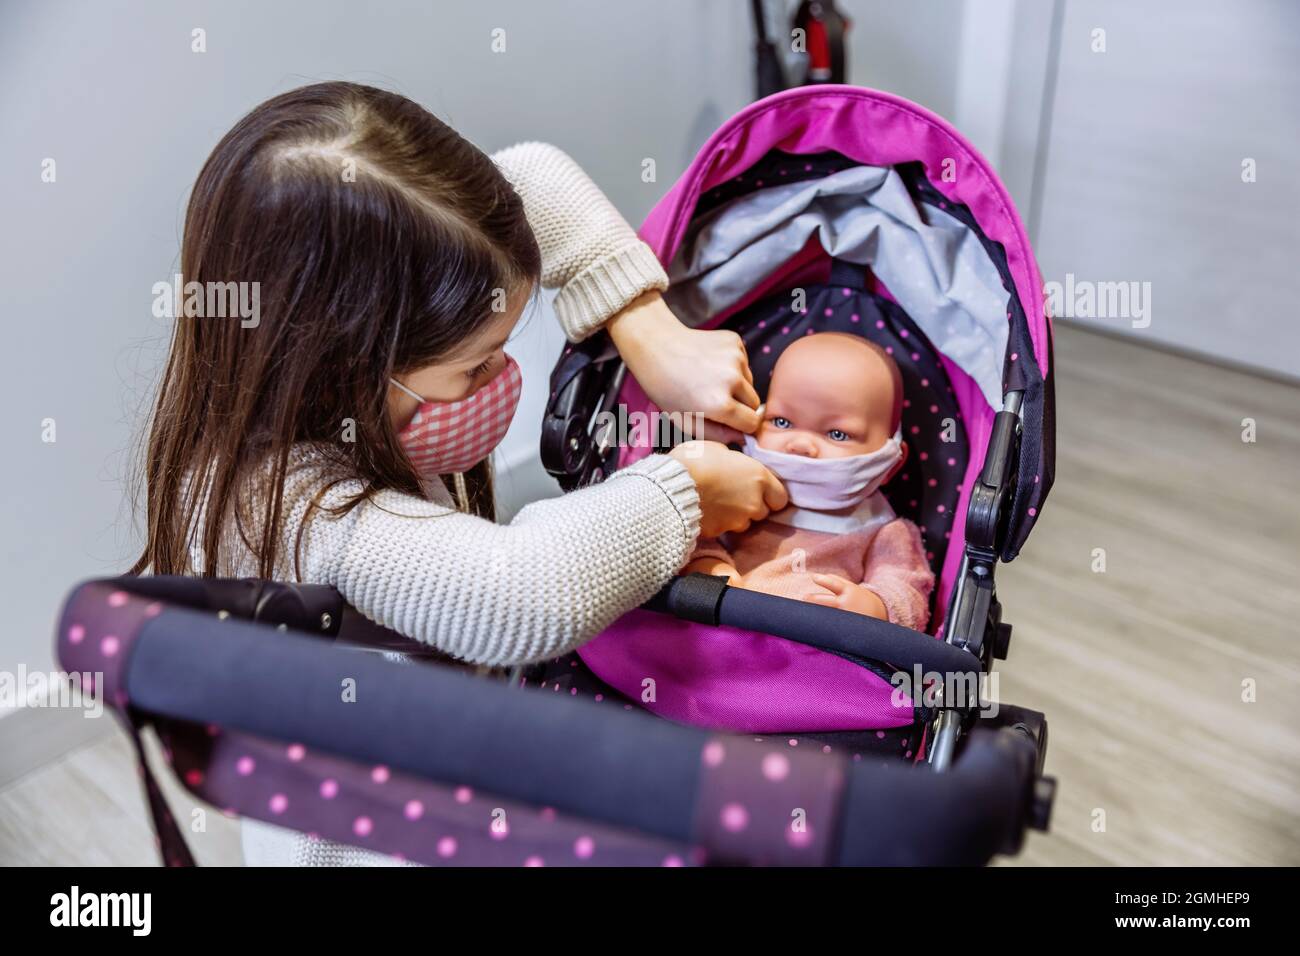 Girl with face mask putting mask on her baby doll Stock Photo